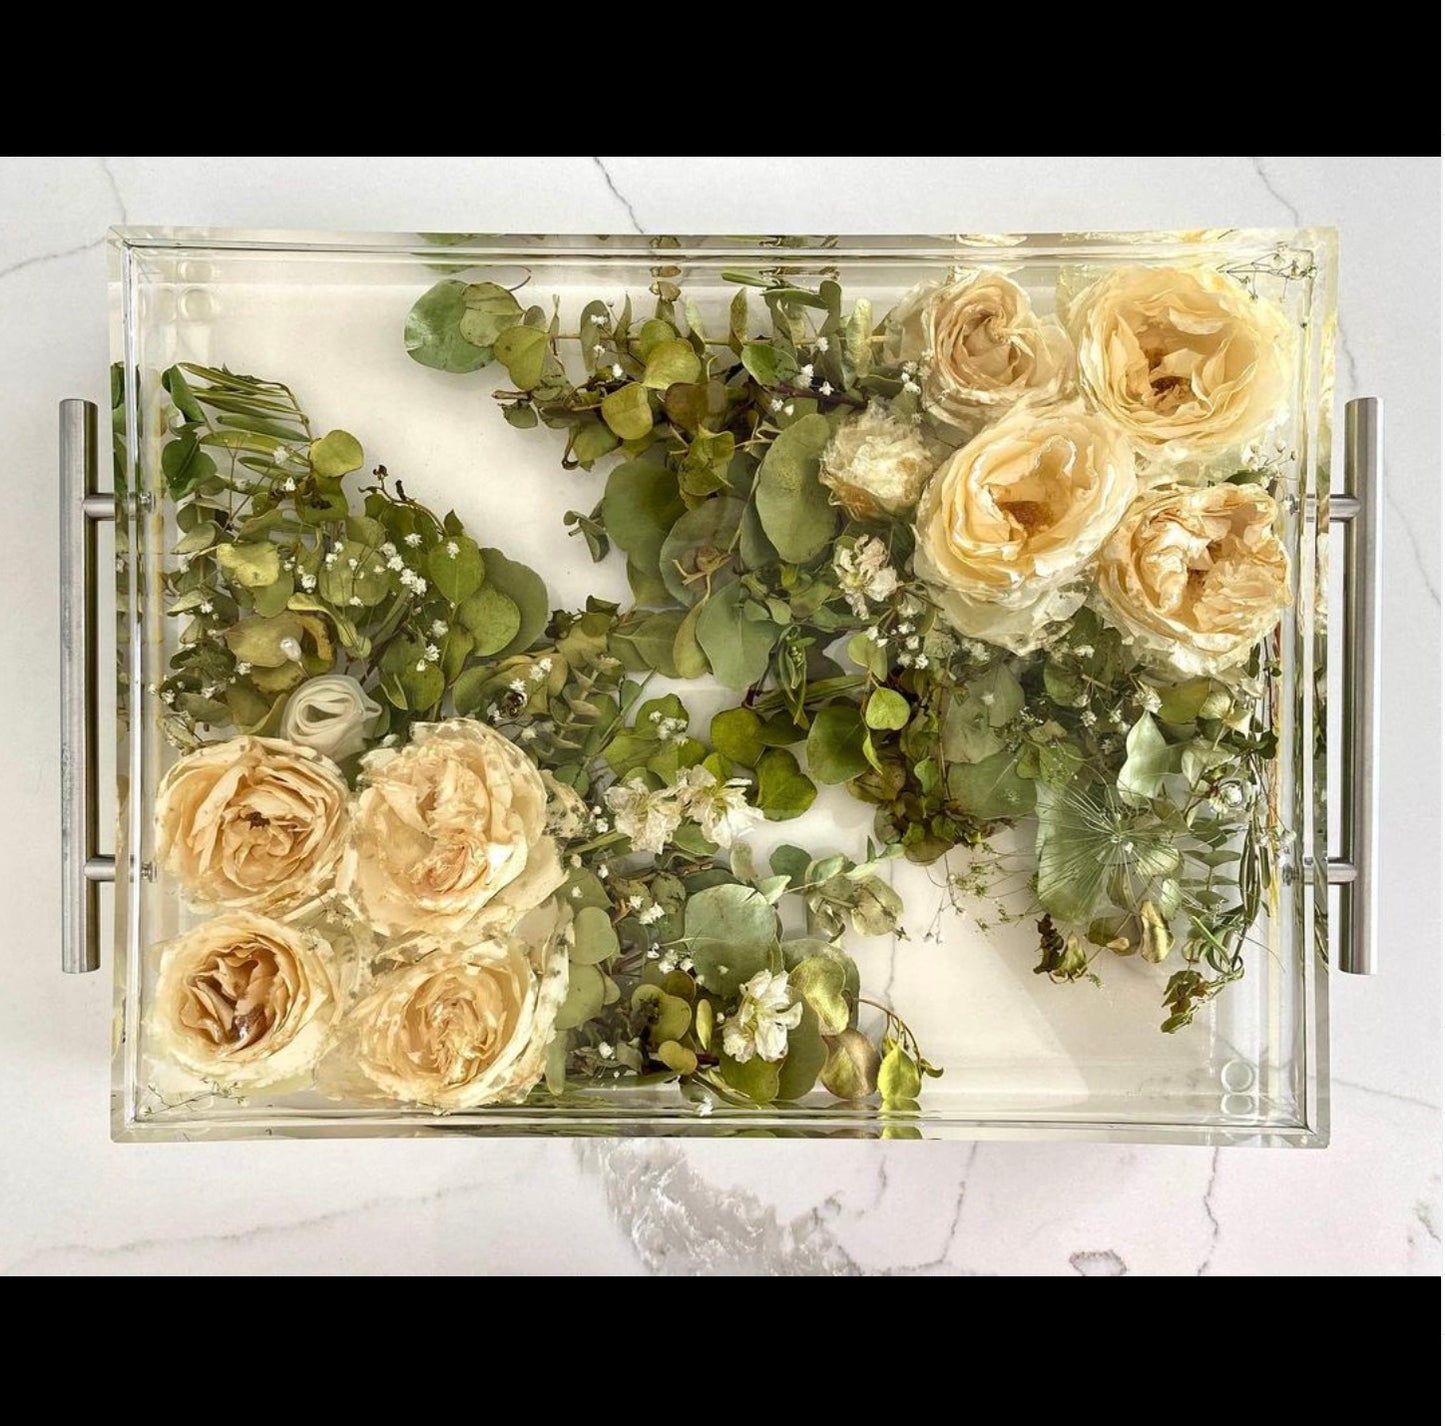 The Acrylic Serving Trays